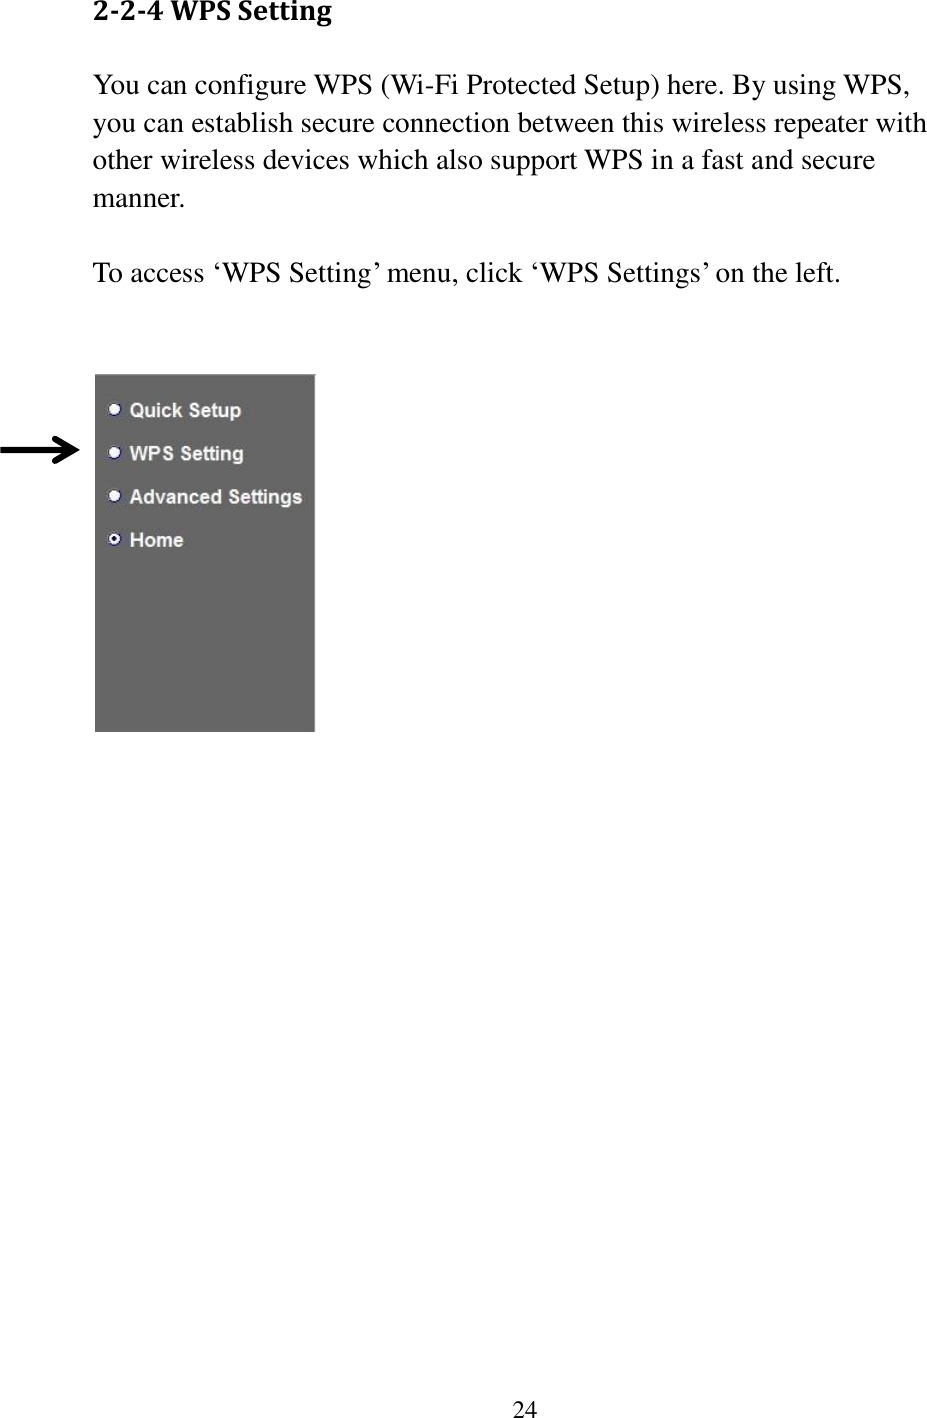 24  2-2-4 WPS Setting You can configure WPS (Wi-Fi Protected Setup) here. By using WPS, you can establish secure connection between this wireless repeater with other wireless devices which also support WPS in a fast and secure manner.  To access „WPS Setting‟ menu, click „WPS Settings‟ on the left.       